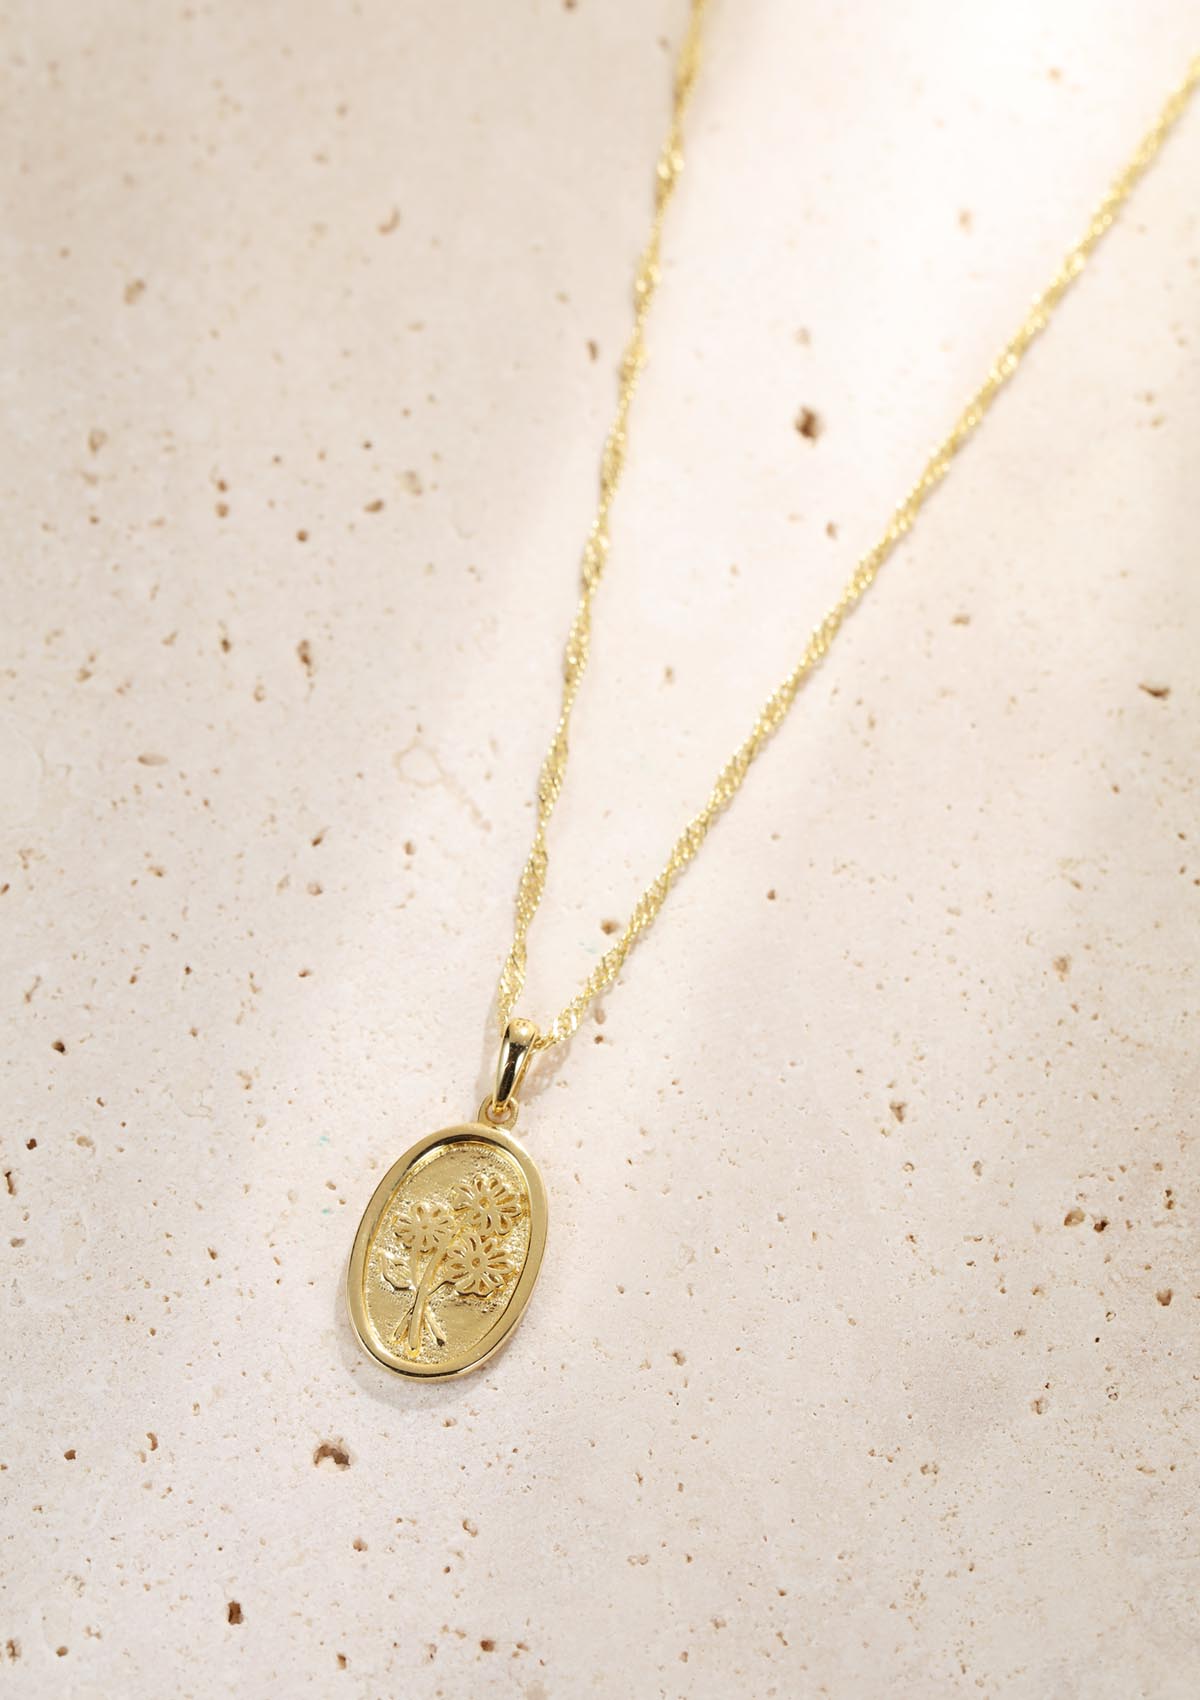 Oval Daisy Pendant Necklace Sterling Silver Gold